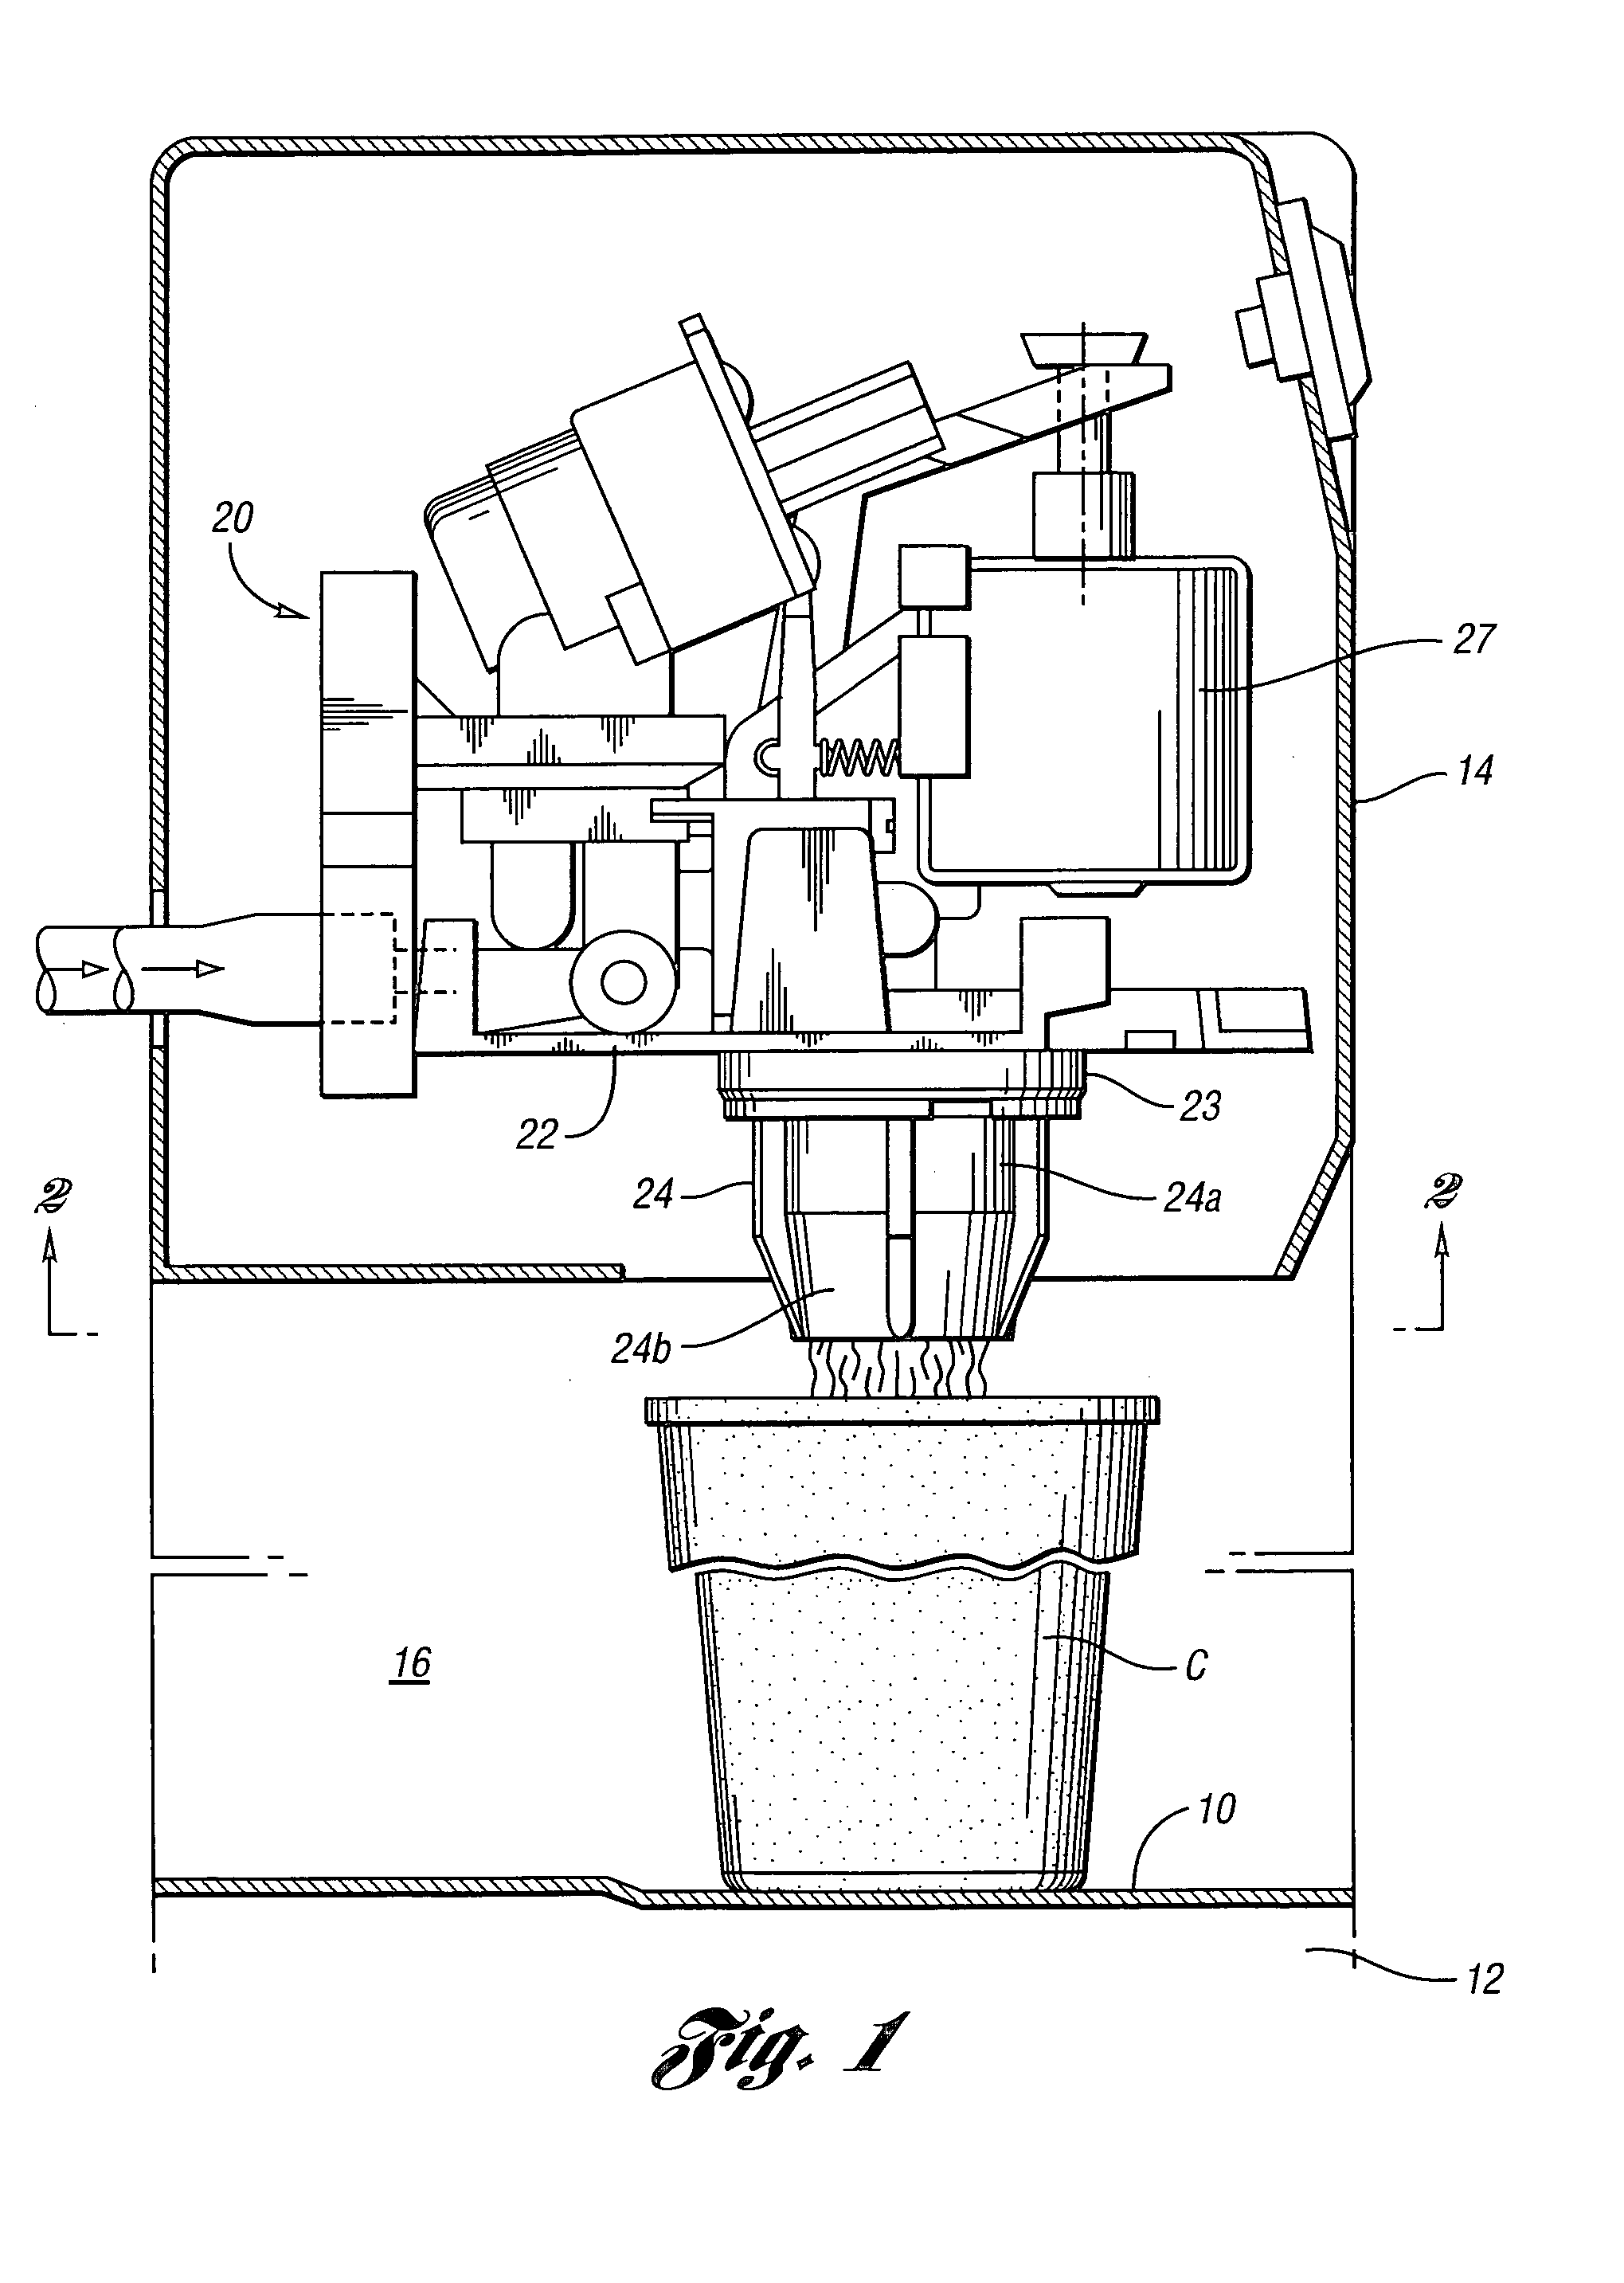 Beverage dispensing apparatus including a whipper insert and method